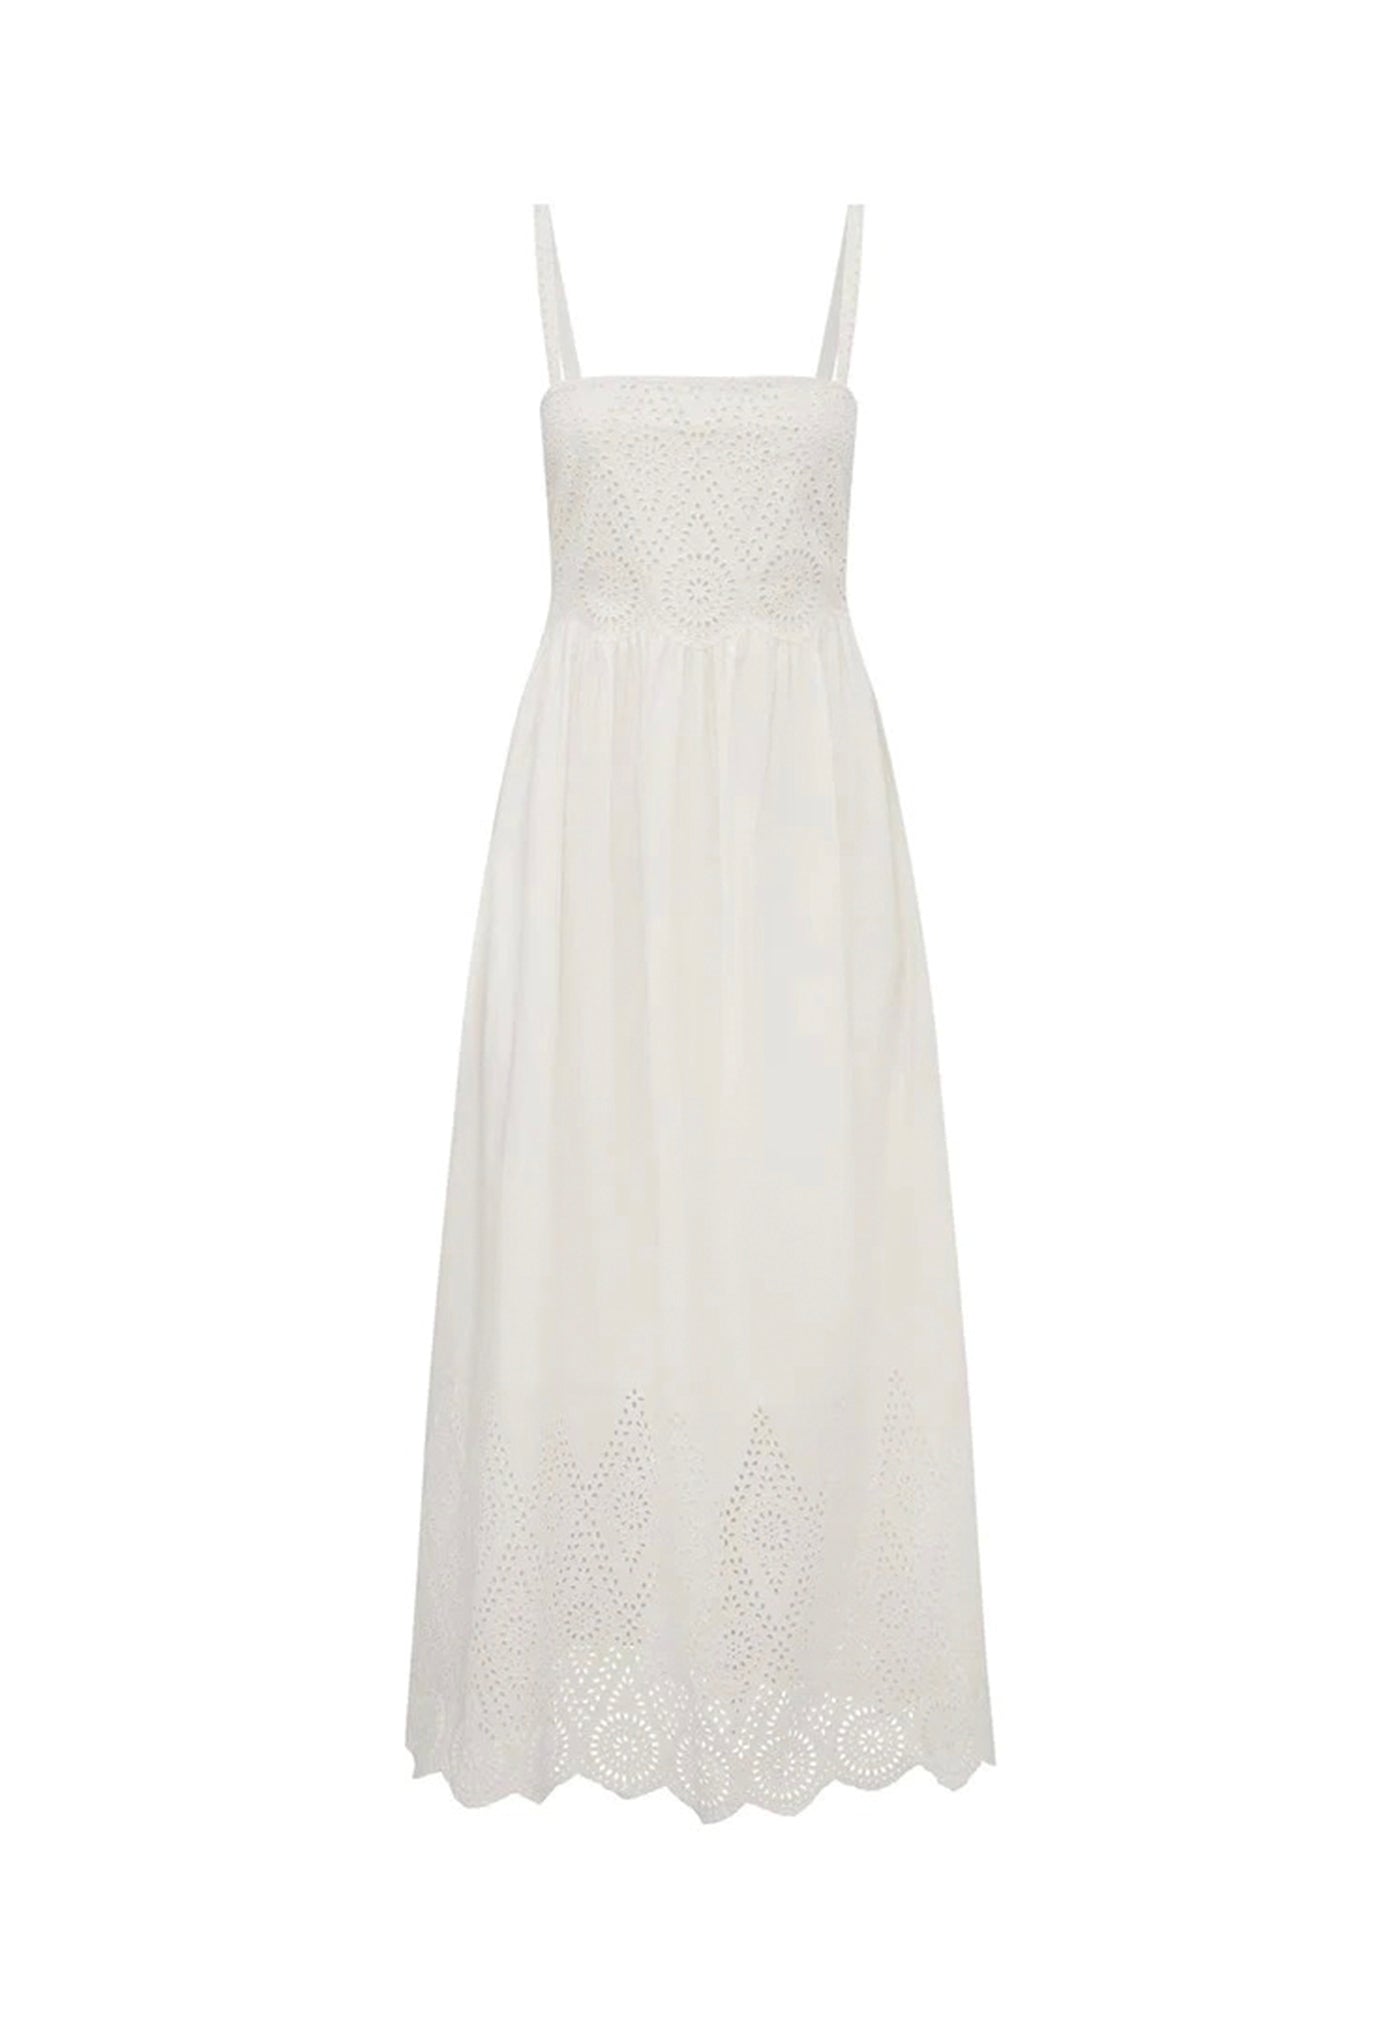 Louisa Dress - Vintage White sold by Angel Divine